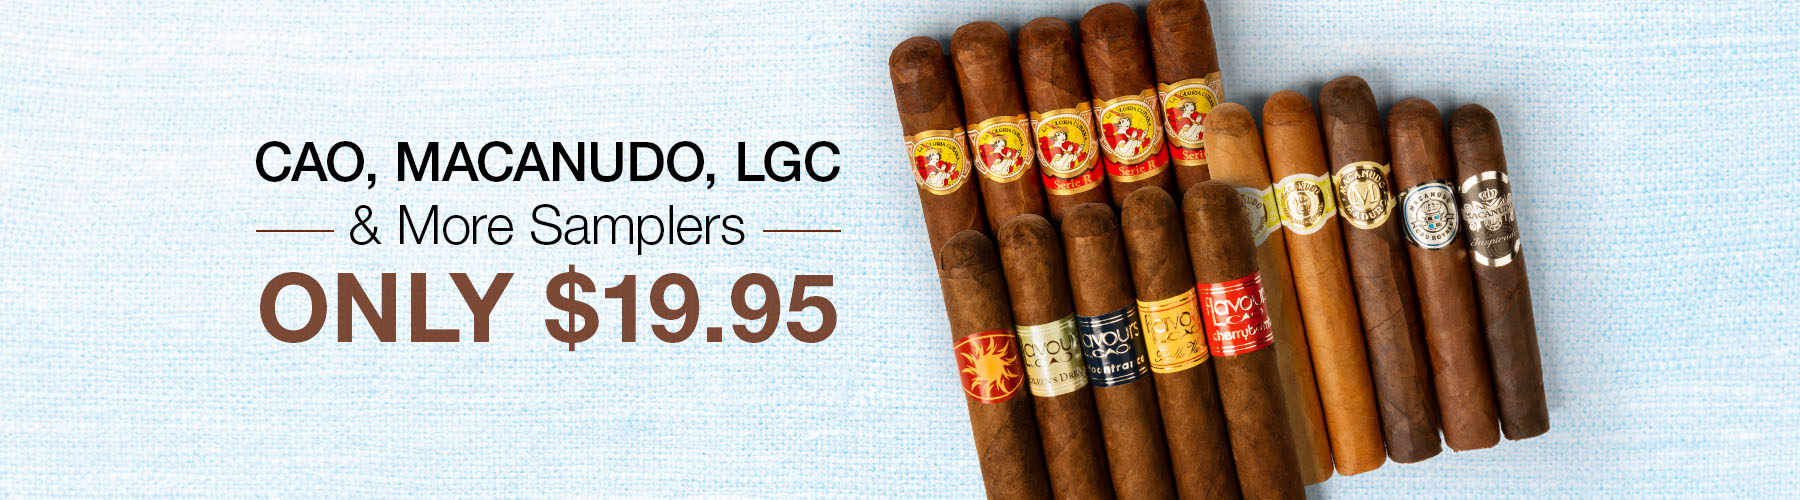 CAO, Macanudo, LGC & More Samplers Only $19.95!